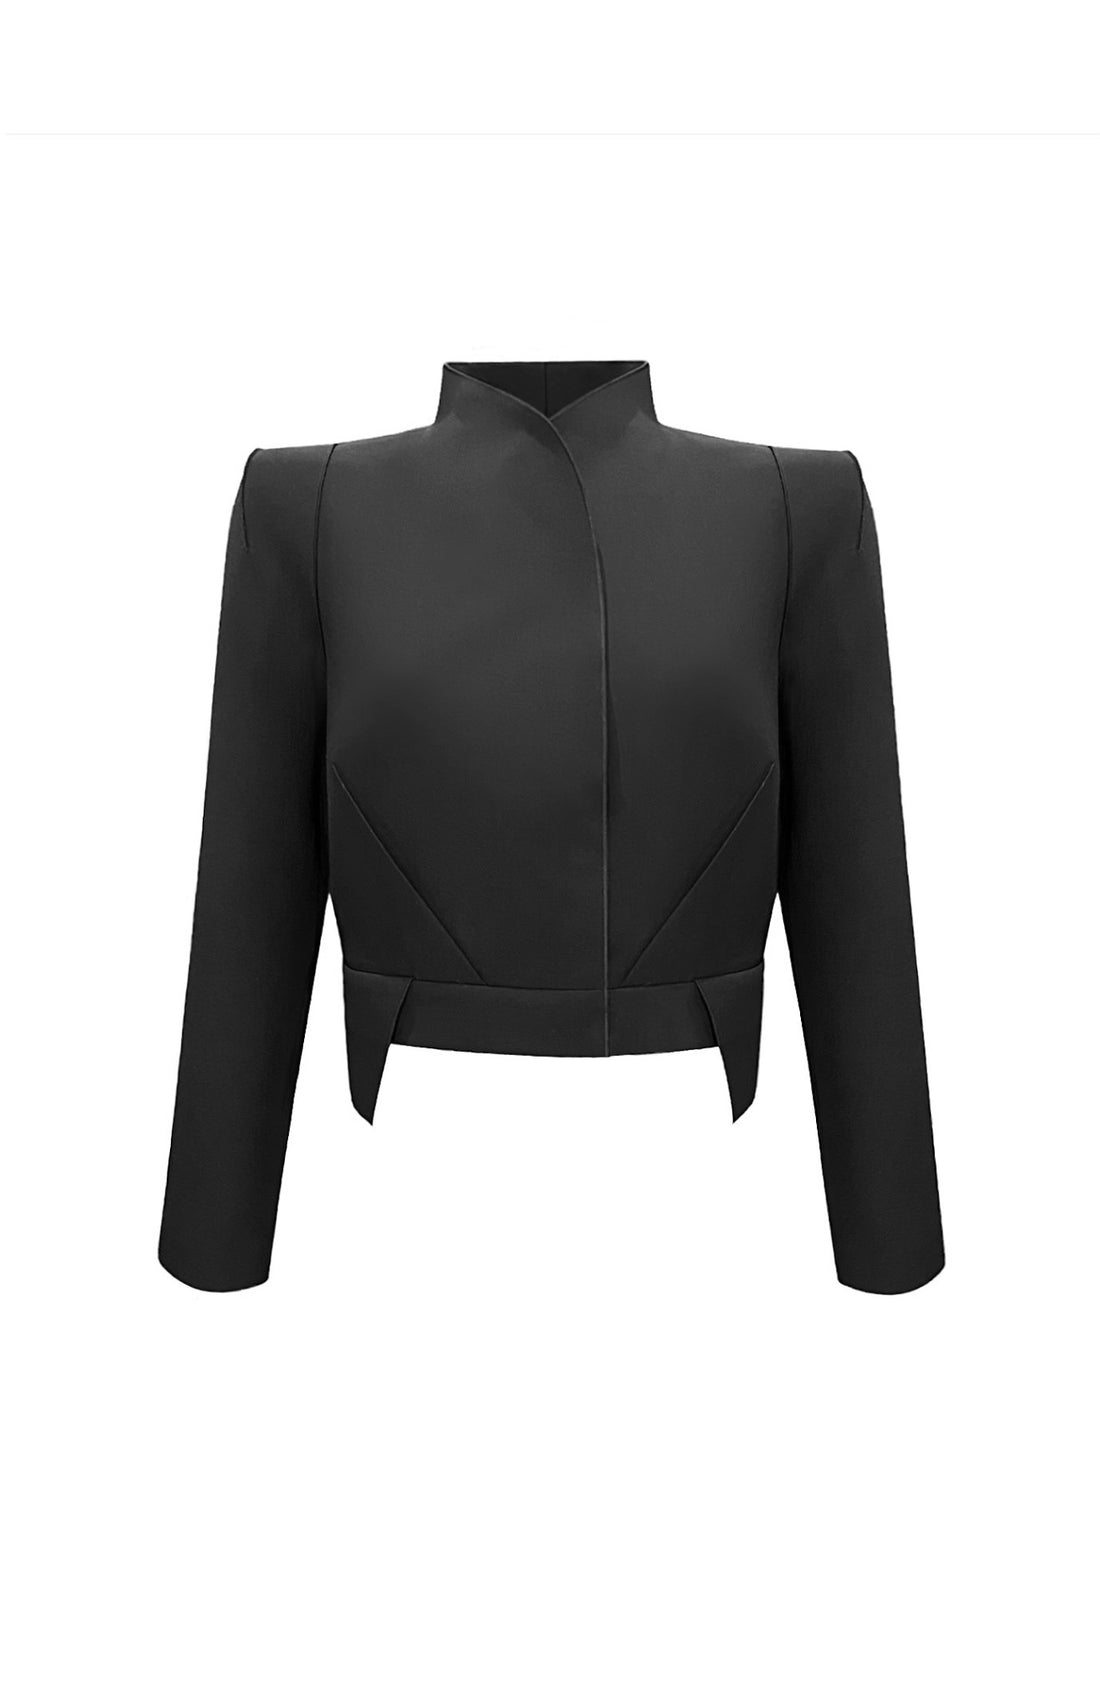 CLASSIC SHORT TAILCOAT IN BLACK AW22